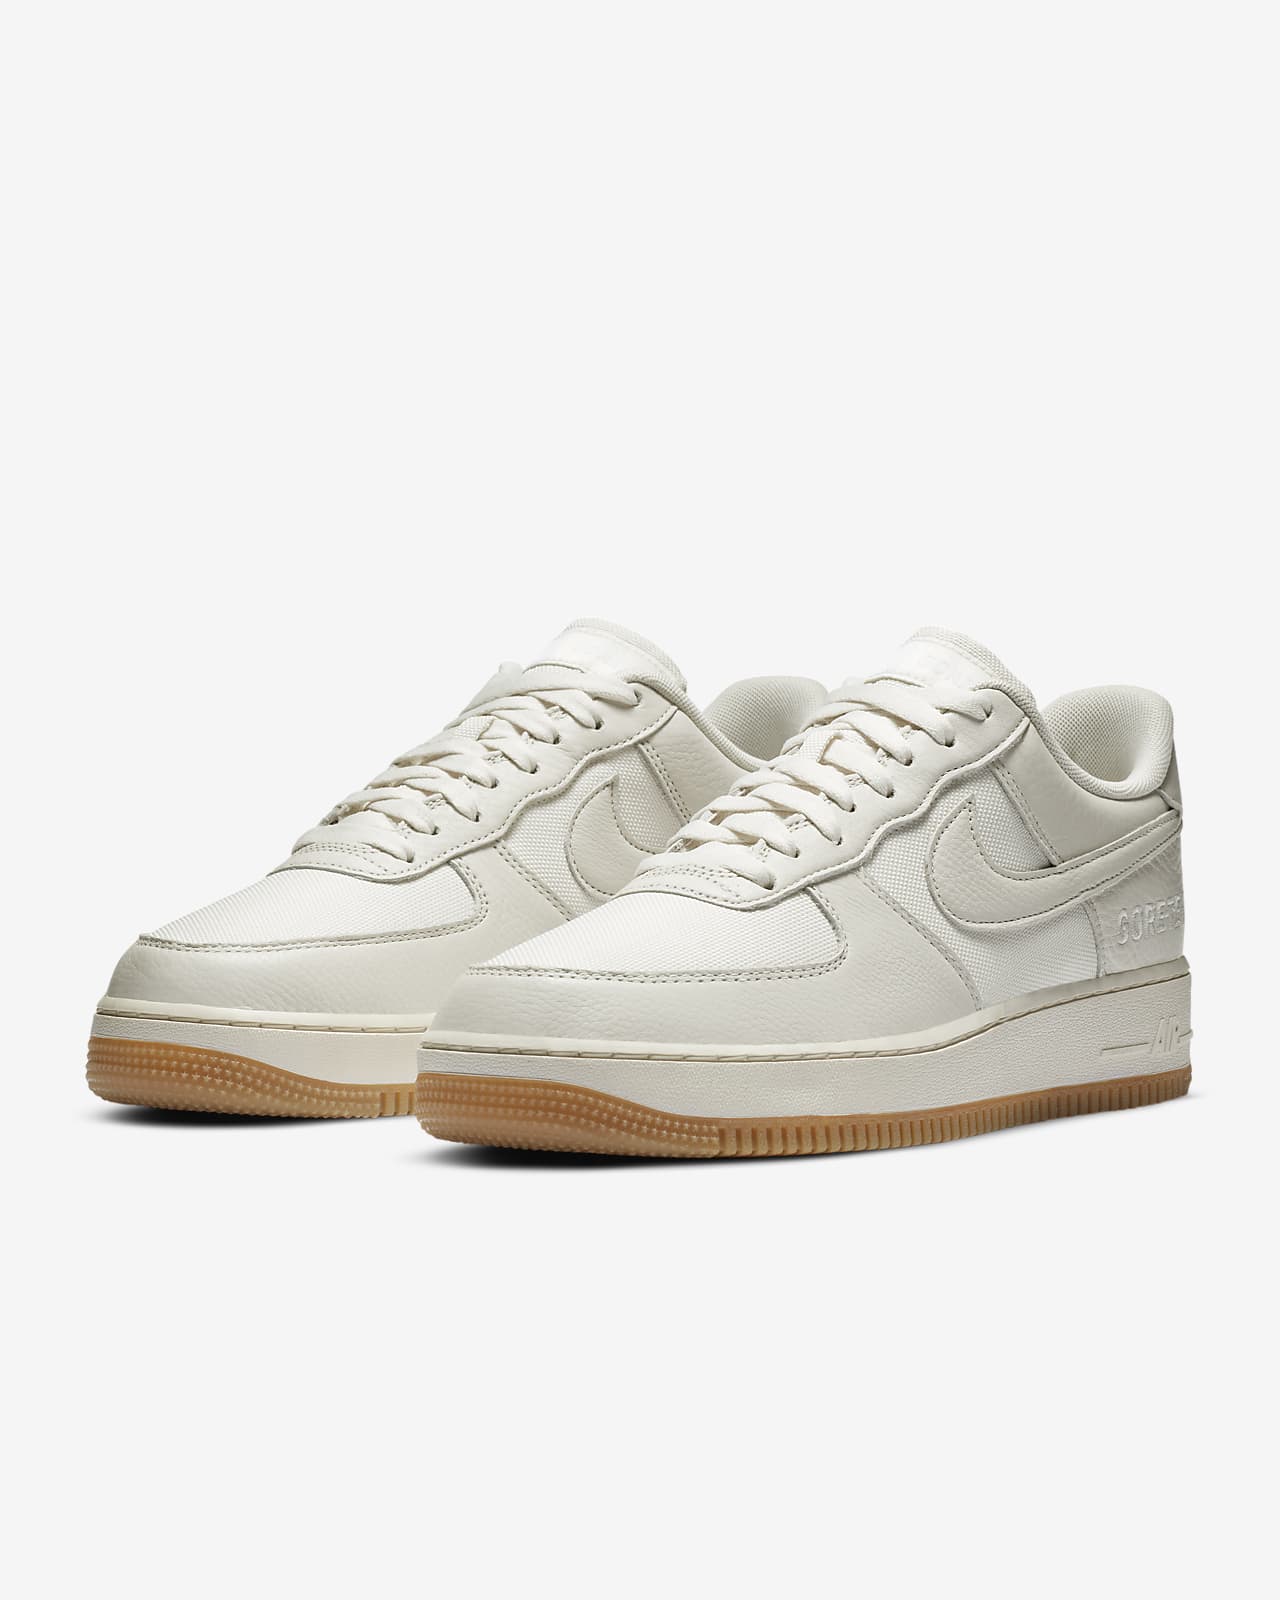 all white air force 1 low men's